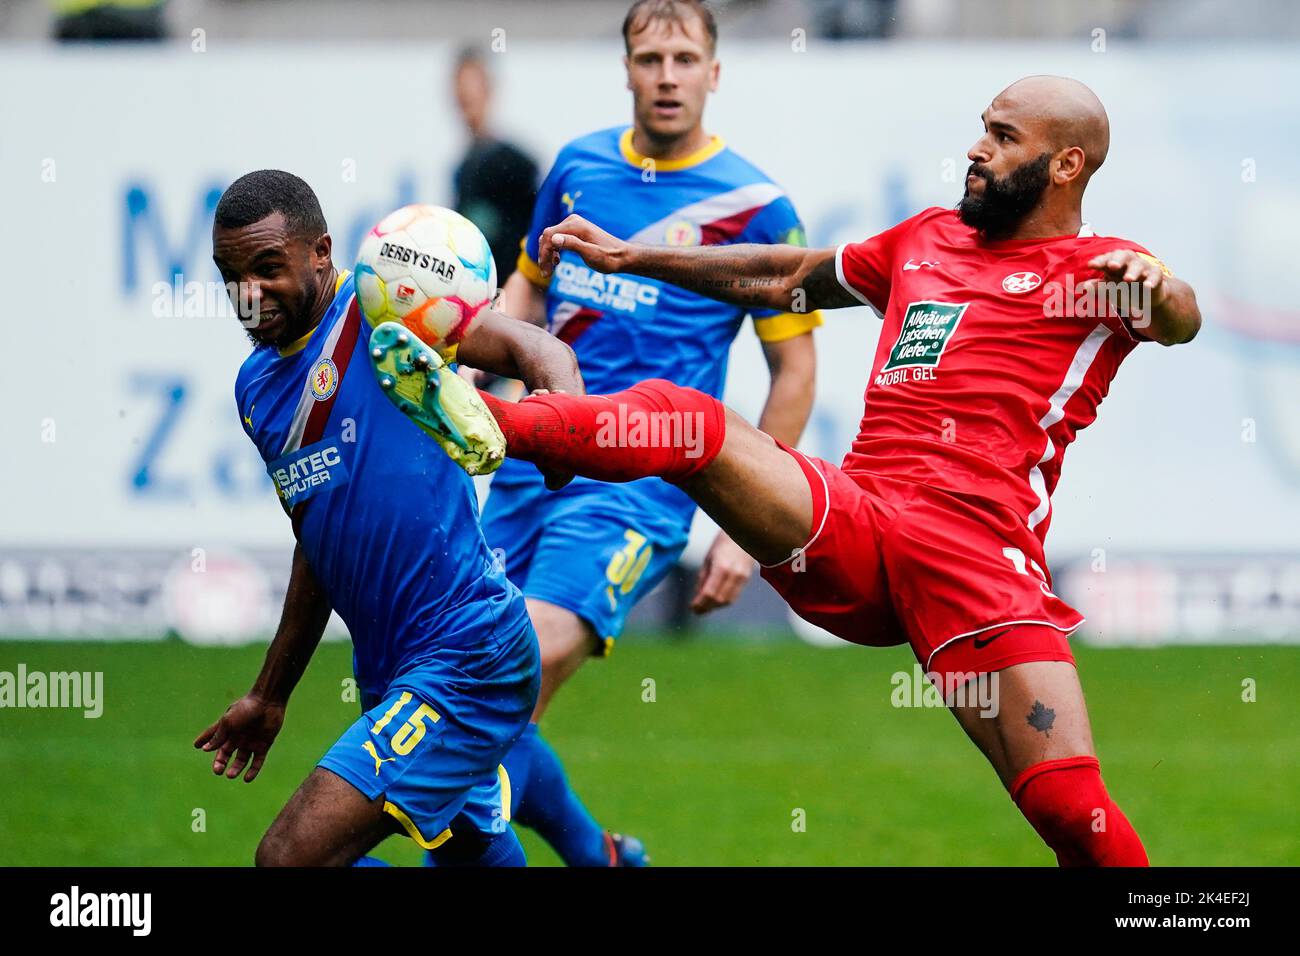 02 October 2022, Rhineland-Palatinate, Kaiserslautern: Soccer: 2nd Bundesliga, 1. FC Kaiserslautern - Eintracht Braunschweig, Matchday 10, Fritz-Walter-Stadion. Braunschweig's Nathan de Medina (l) and Kaiserslautern's Terrence Boyd fight for the ball. Photo: Uwe Anspach/dpa - IMPORTANT NOTE: In accordance with the requirements of the DFL Deutsche Fußball Liga and the DFB Deutscher Fußball-Bund, it is prohibited to use or have used photographs taken in the stadium and/or of the match in the form of sequence pictures and/or video-like photo series. Stock Photo